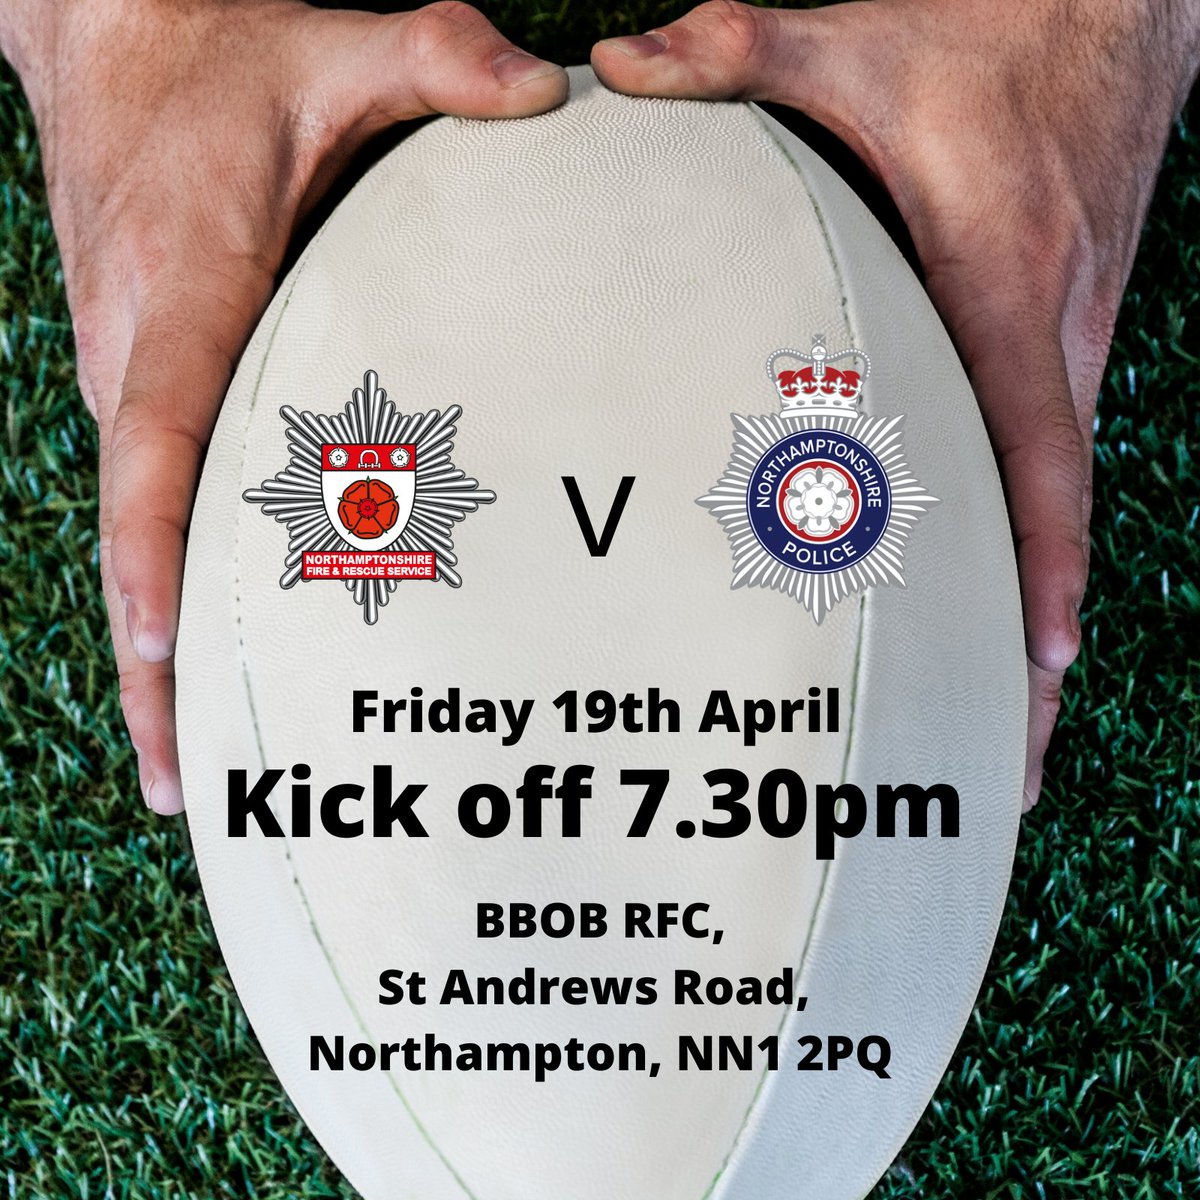 Everyone is welcome to come and support the teams in the next epic Northants Fire v @NorthantsPolice rugby match. 

📅 Friday 19th April 2024
🏉 Kick-off 7.30pm
📍 BBOB RFC, St Andrews Road, Northampton, NN1 2PQ

Refreshments also available to purchase.

#TeamNorthantsFire